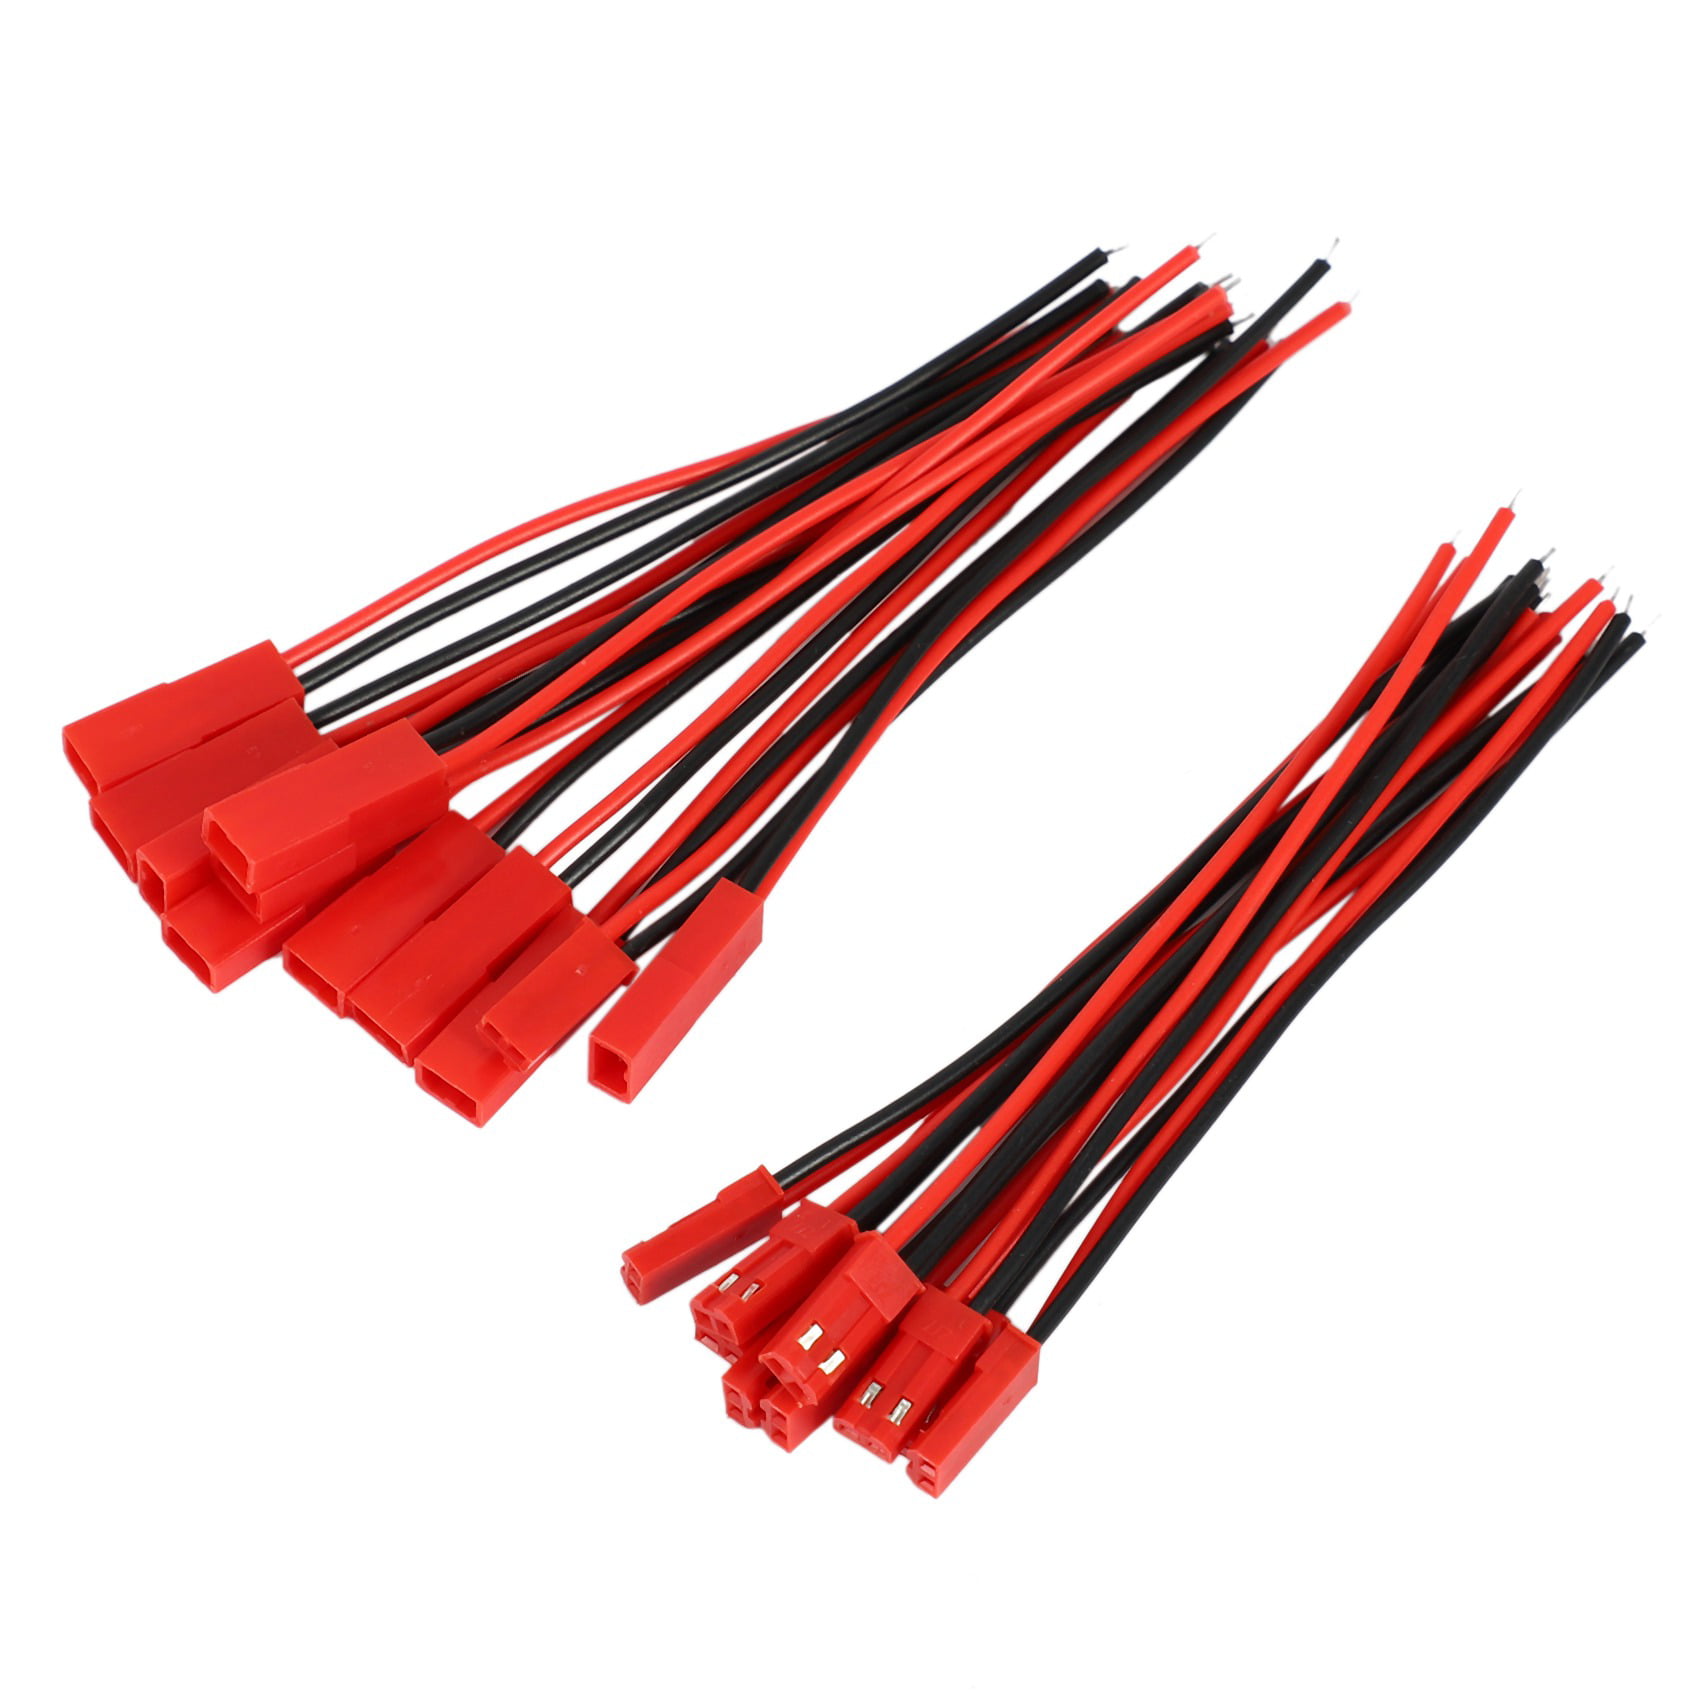 10 Pairs 2 Pin Plug Socket Connector M to F 110mm Cable Wire Red Black Comfortable and Environmentally 